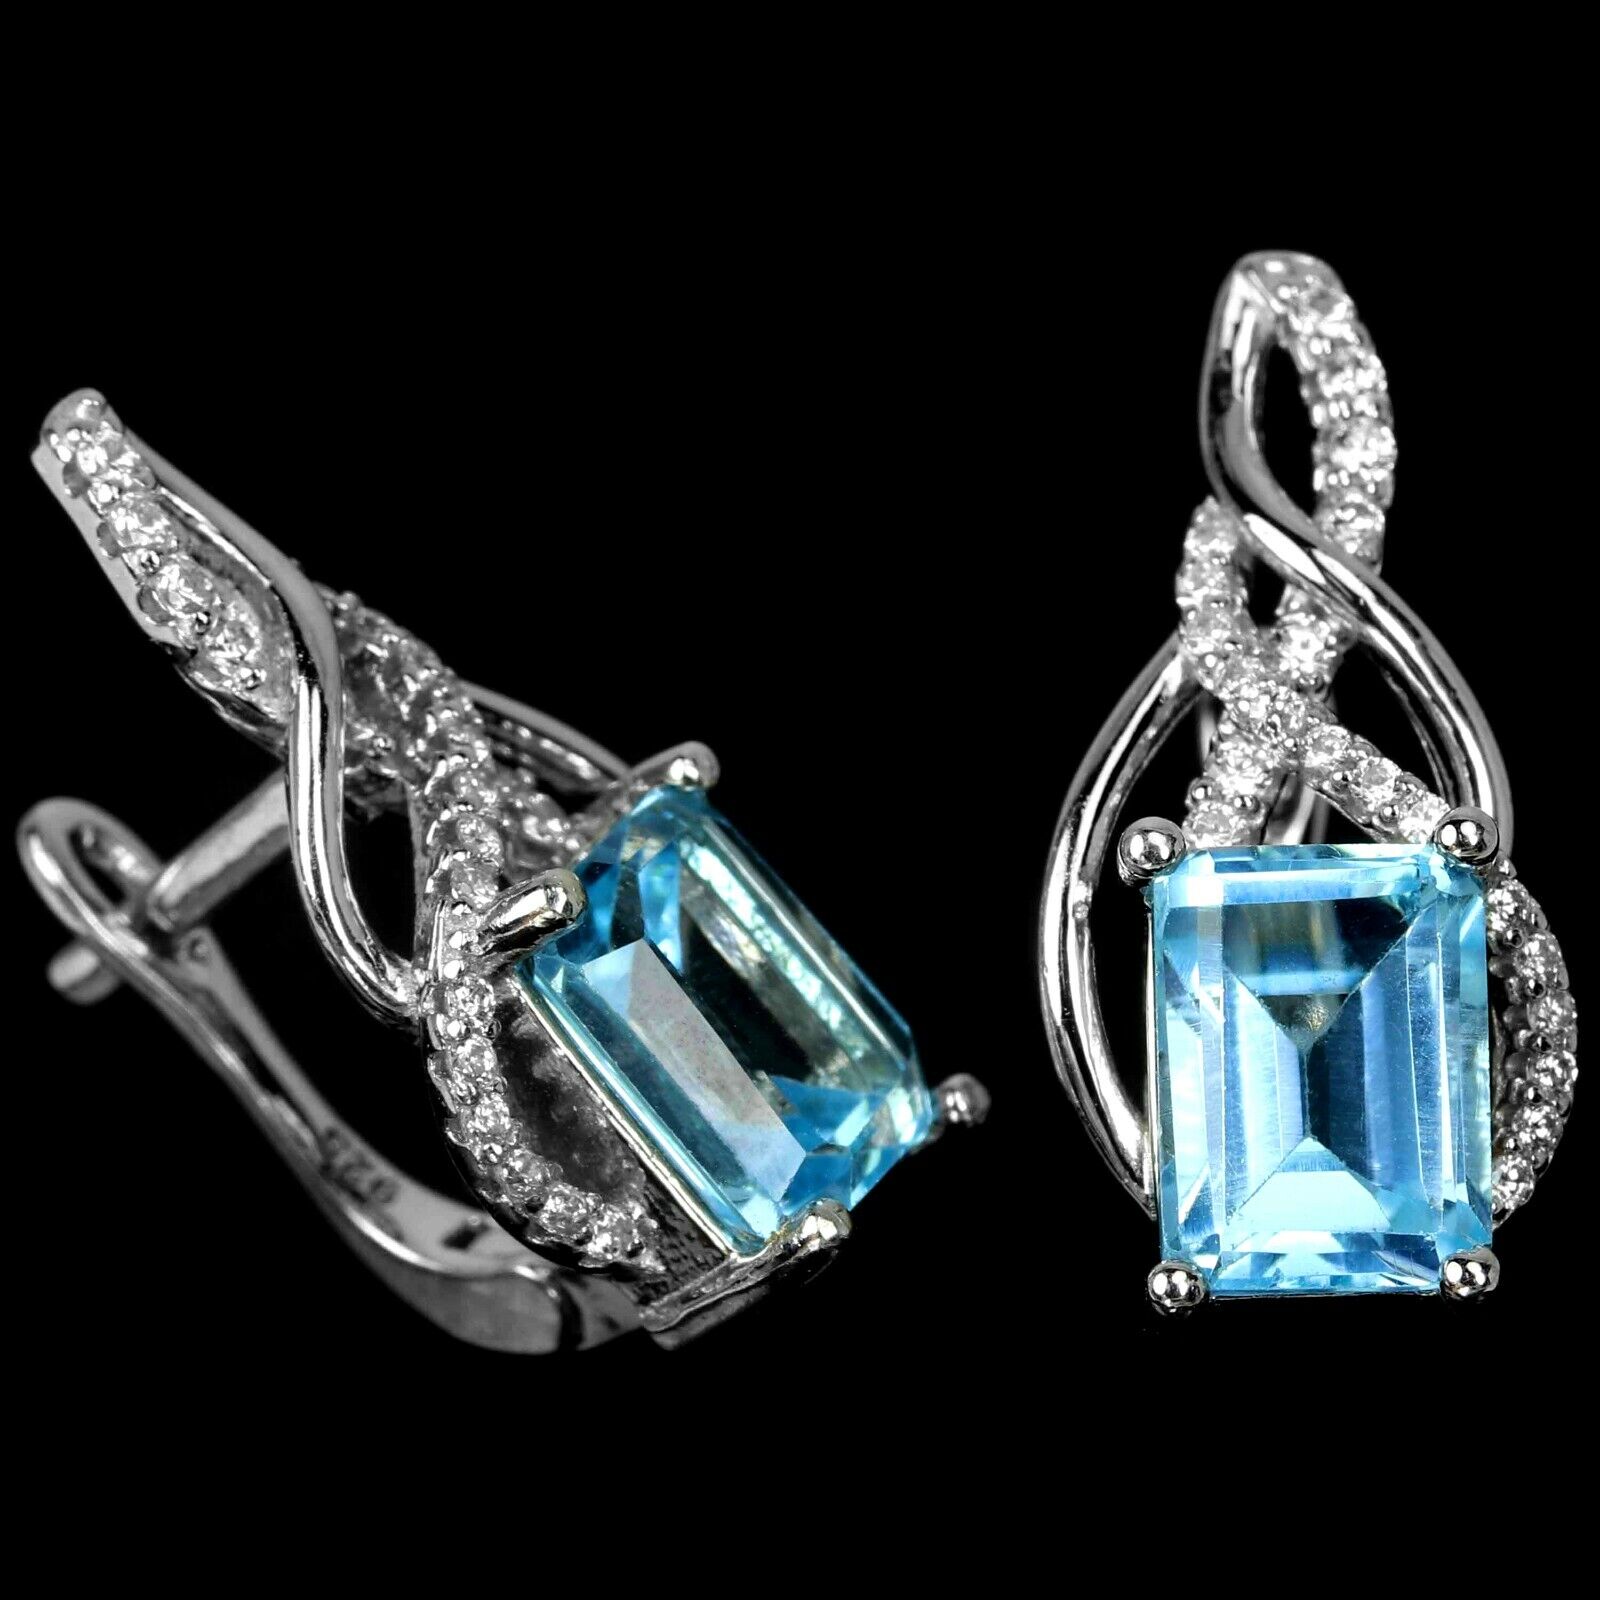 A pair of 925 silver earrings set with baguette cut blue topaz, L. 2.1cm. - Image 2 of 2